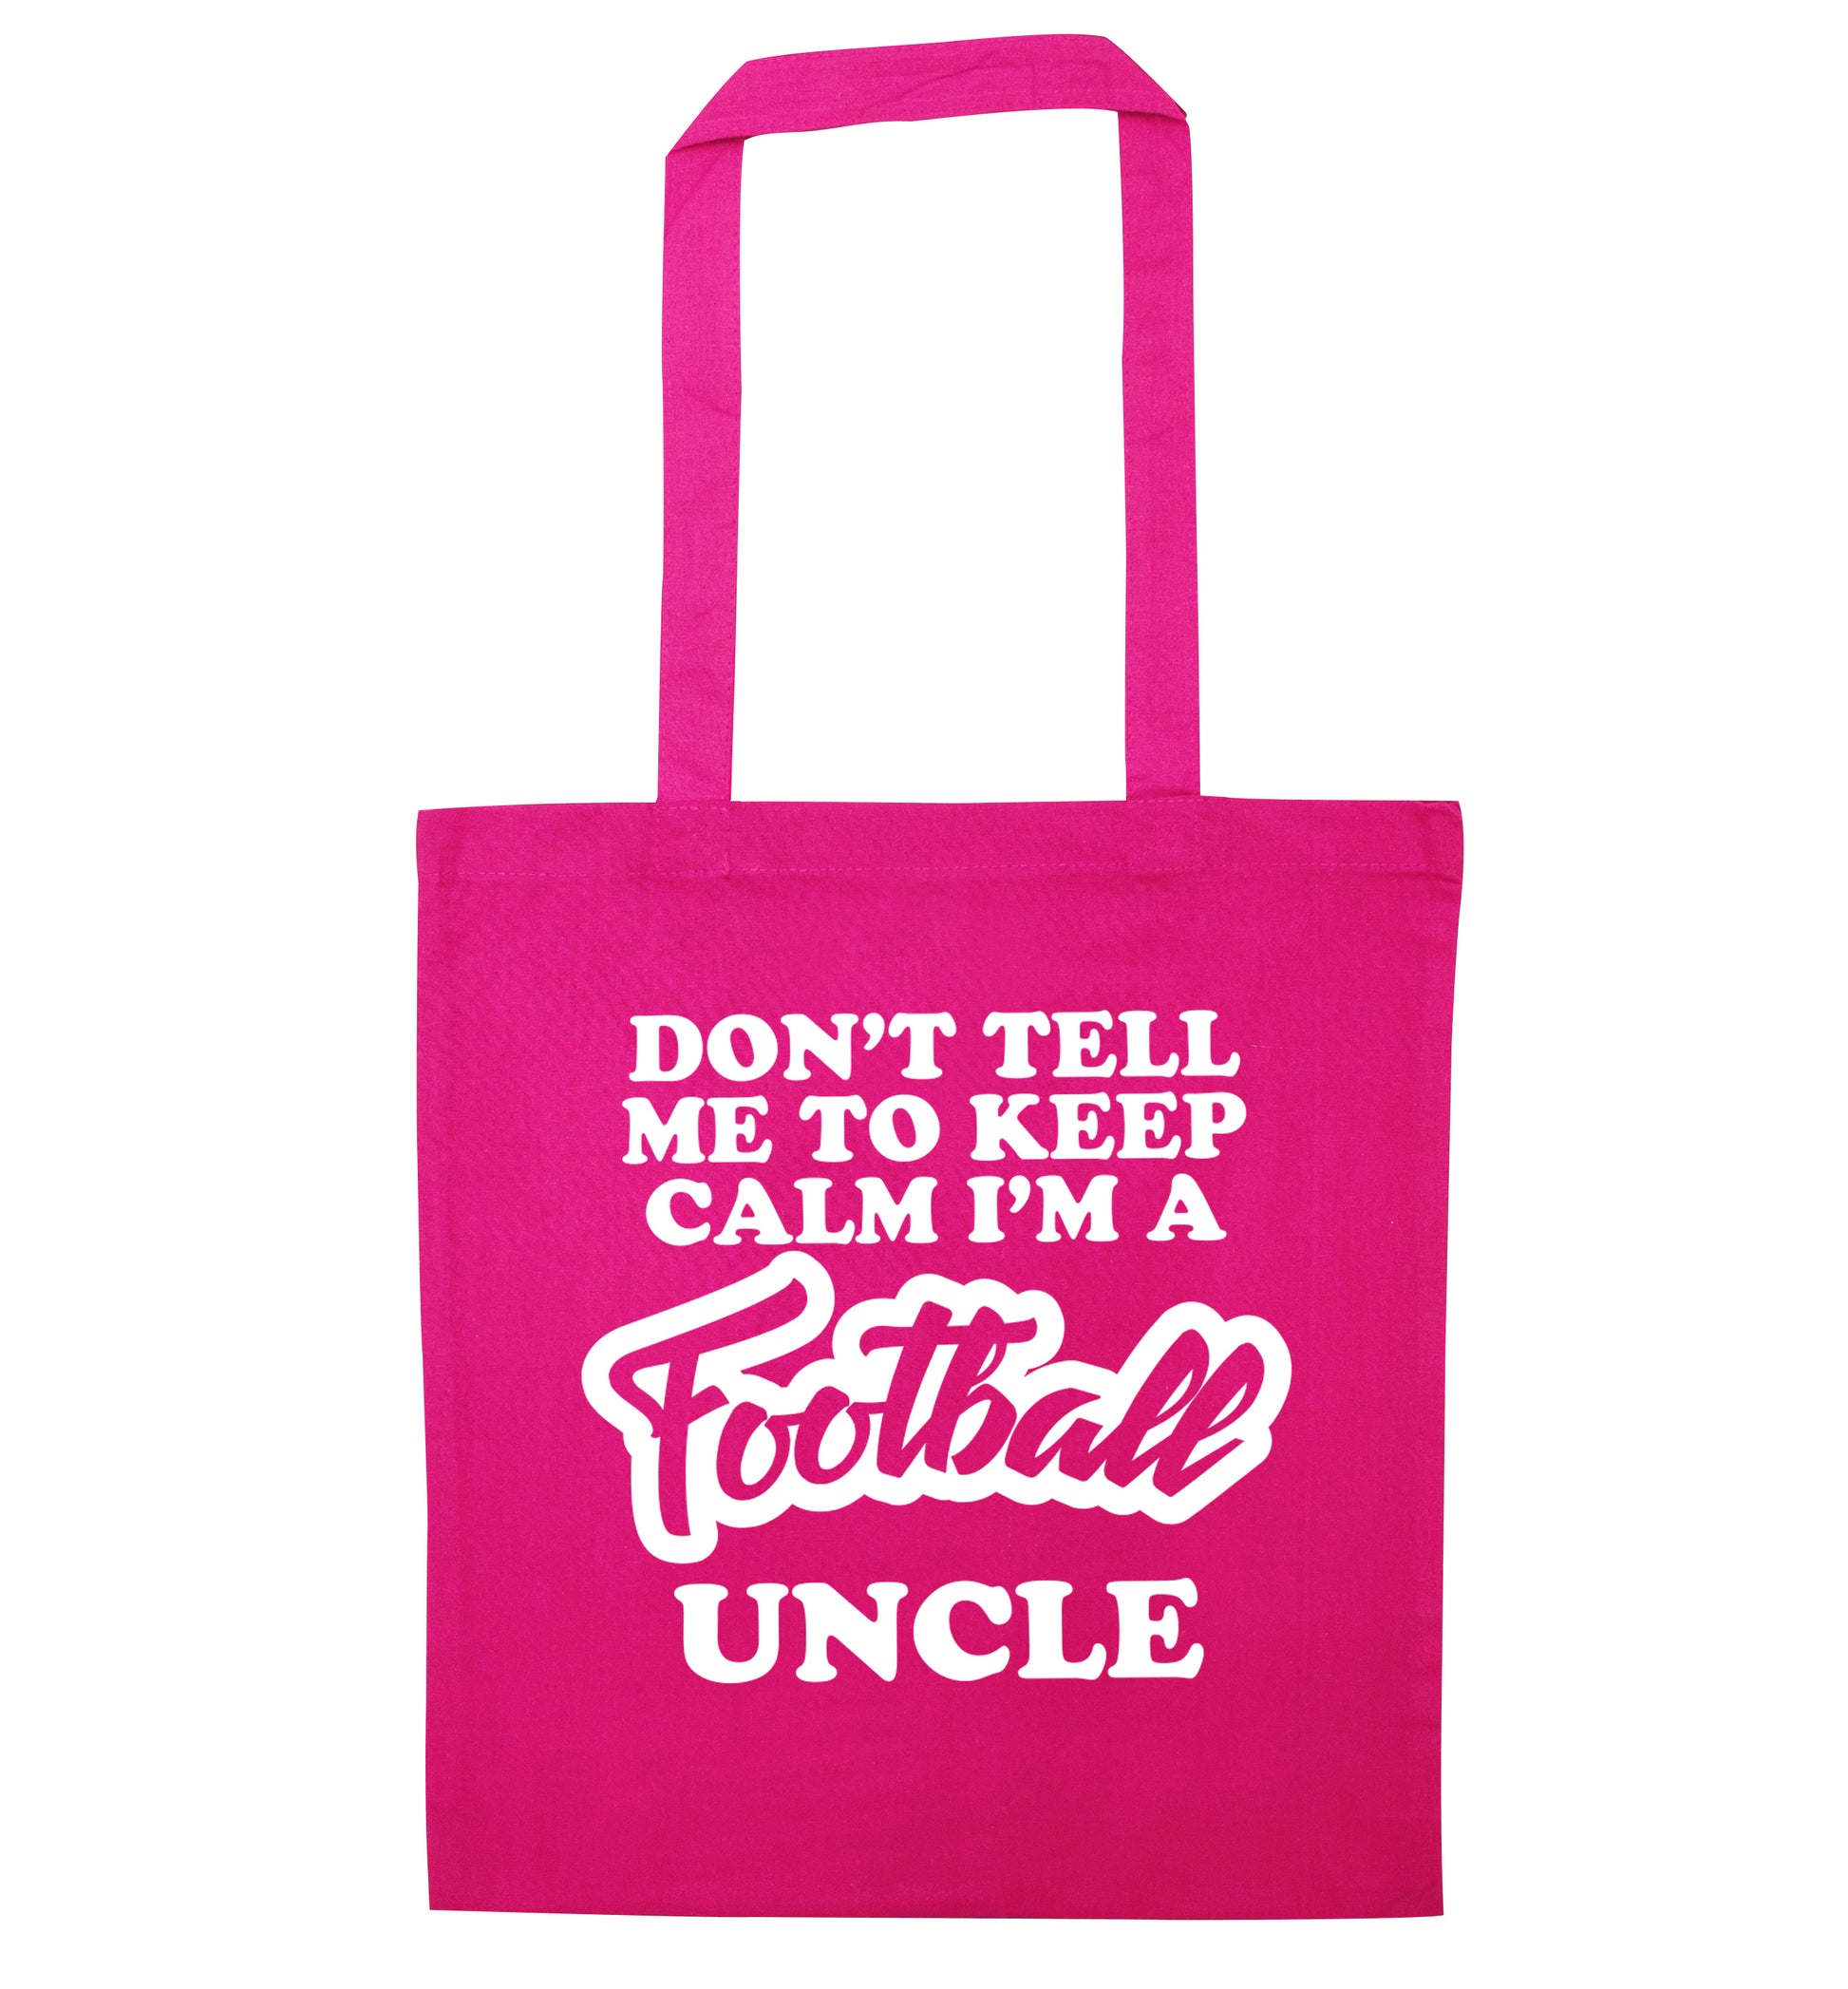 Don't tell me to keep calm I'm a football uncle pink tote bag